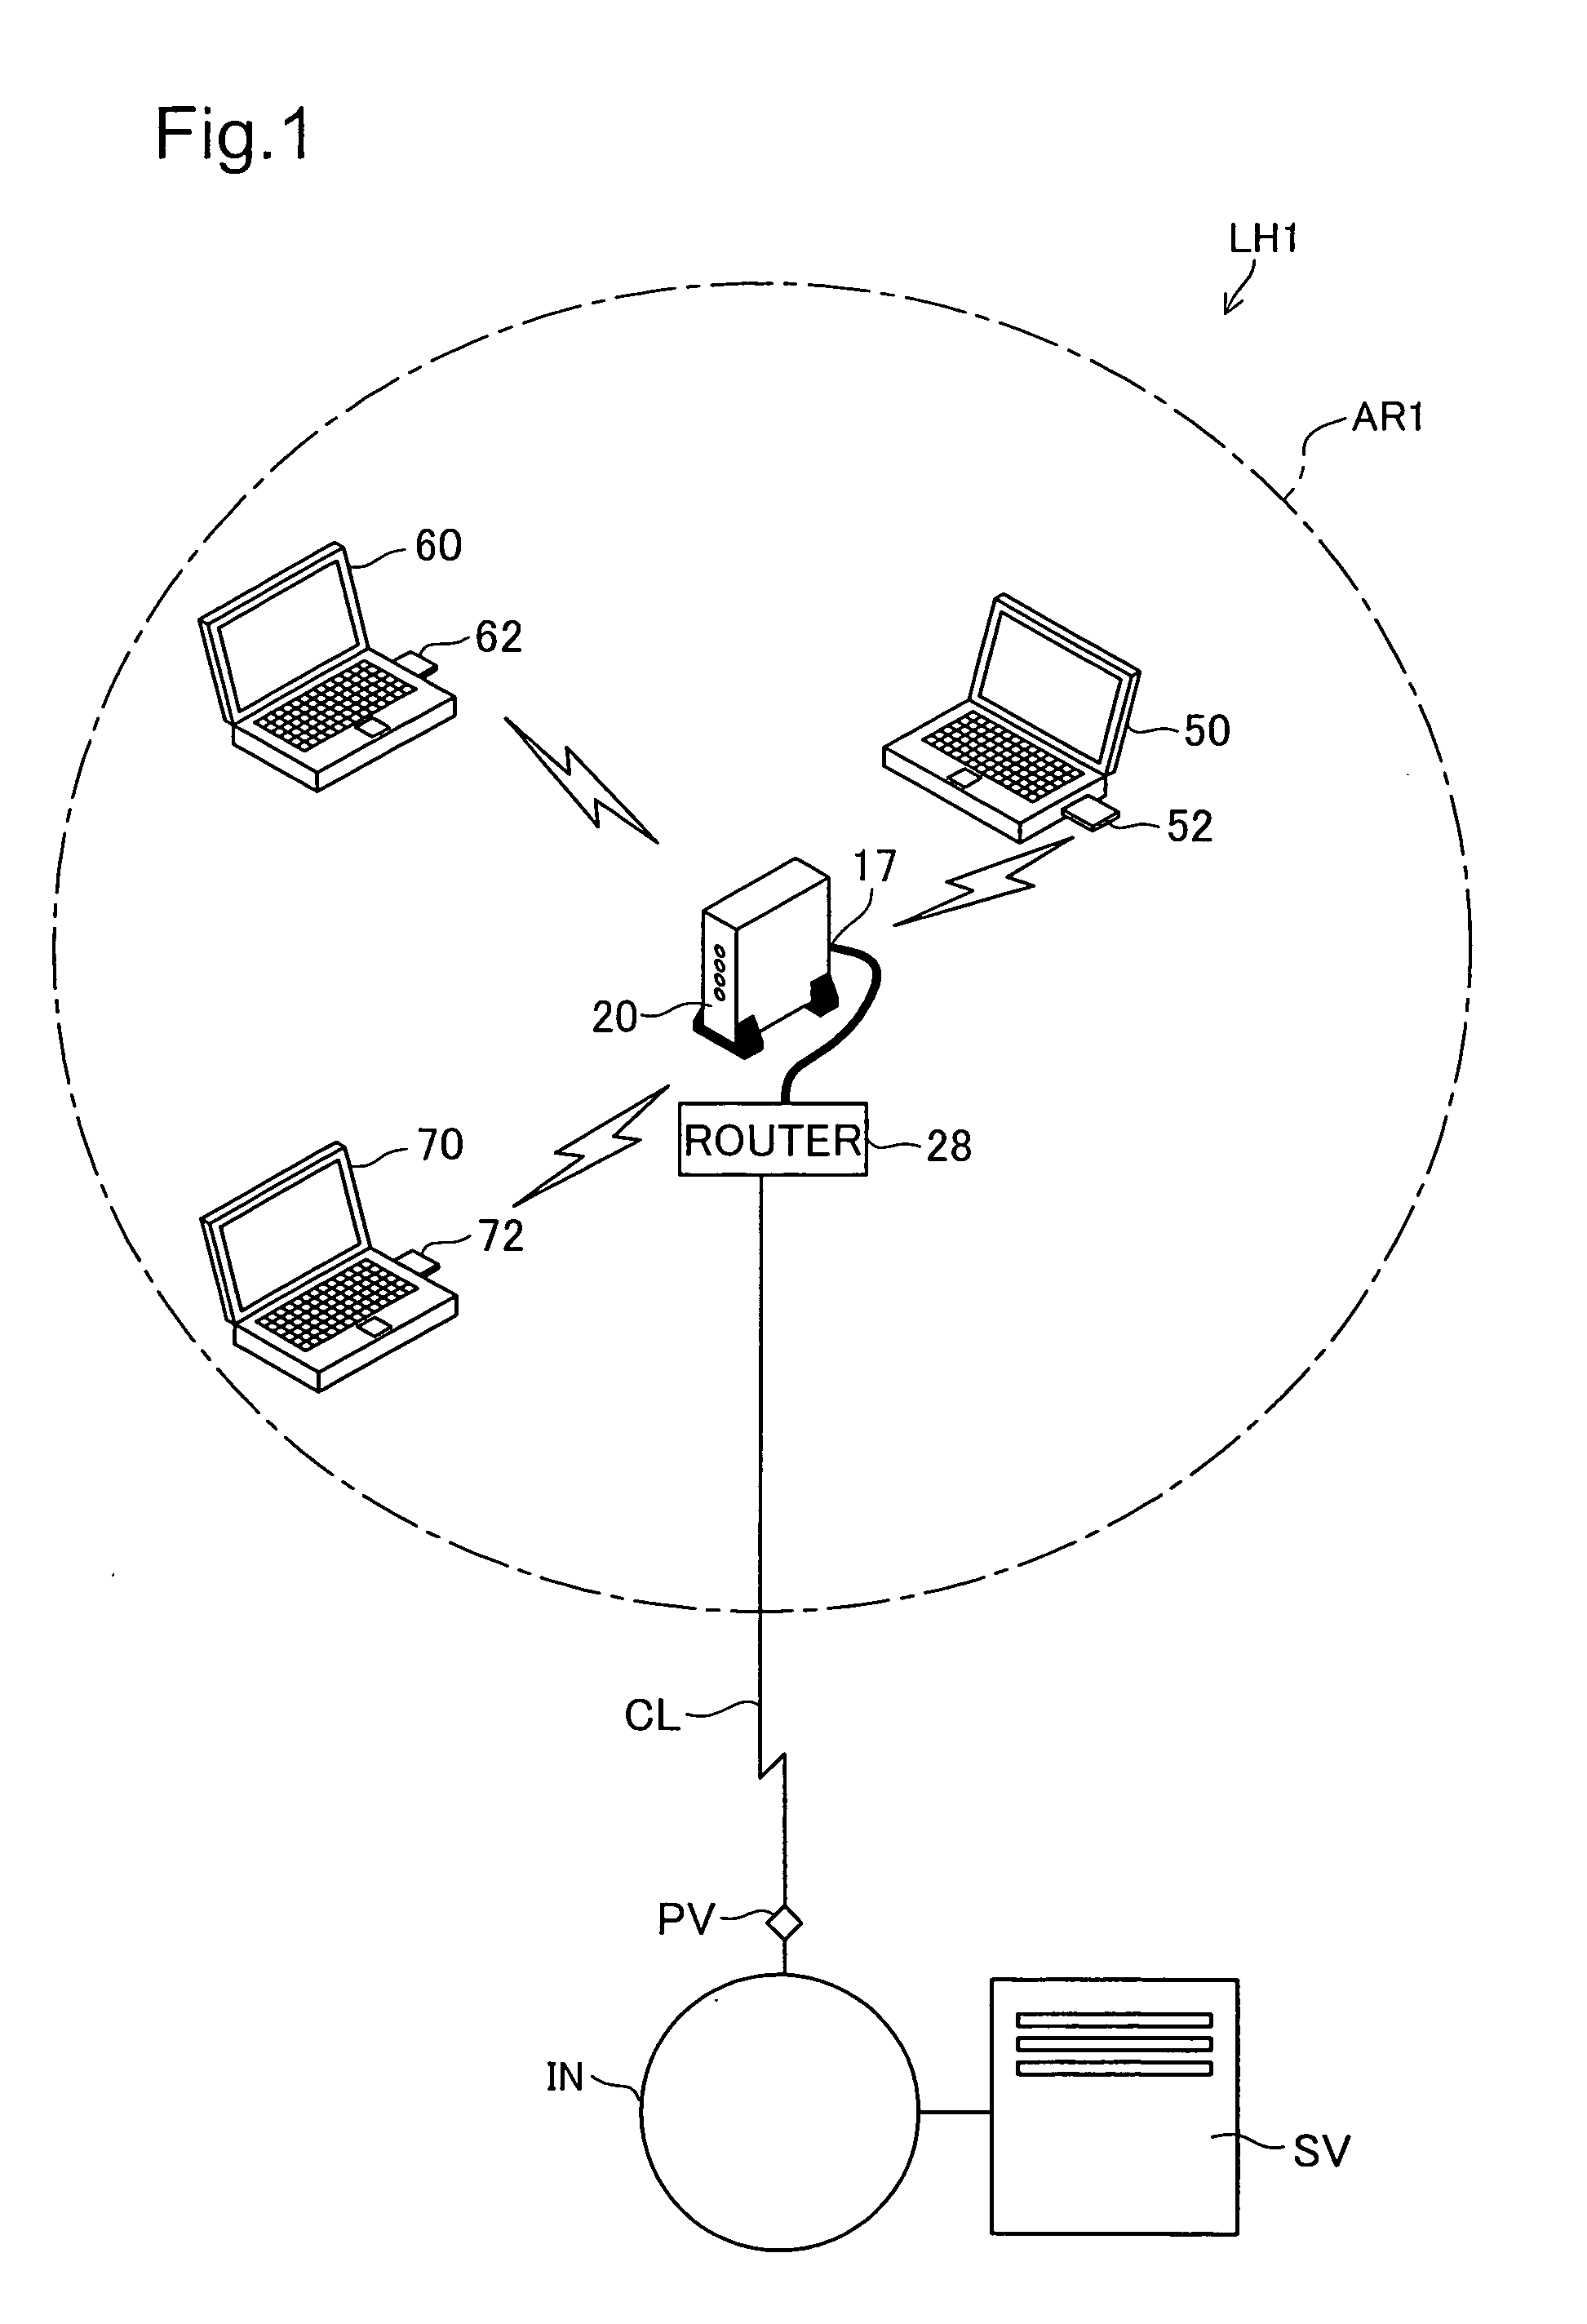 Encryption key setting system, access point, encryption key setting method, and authentication code setting system